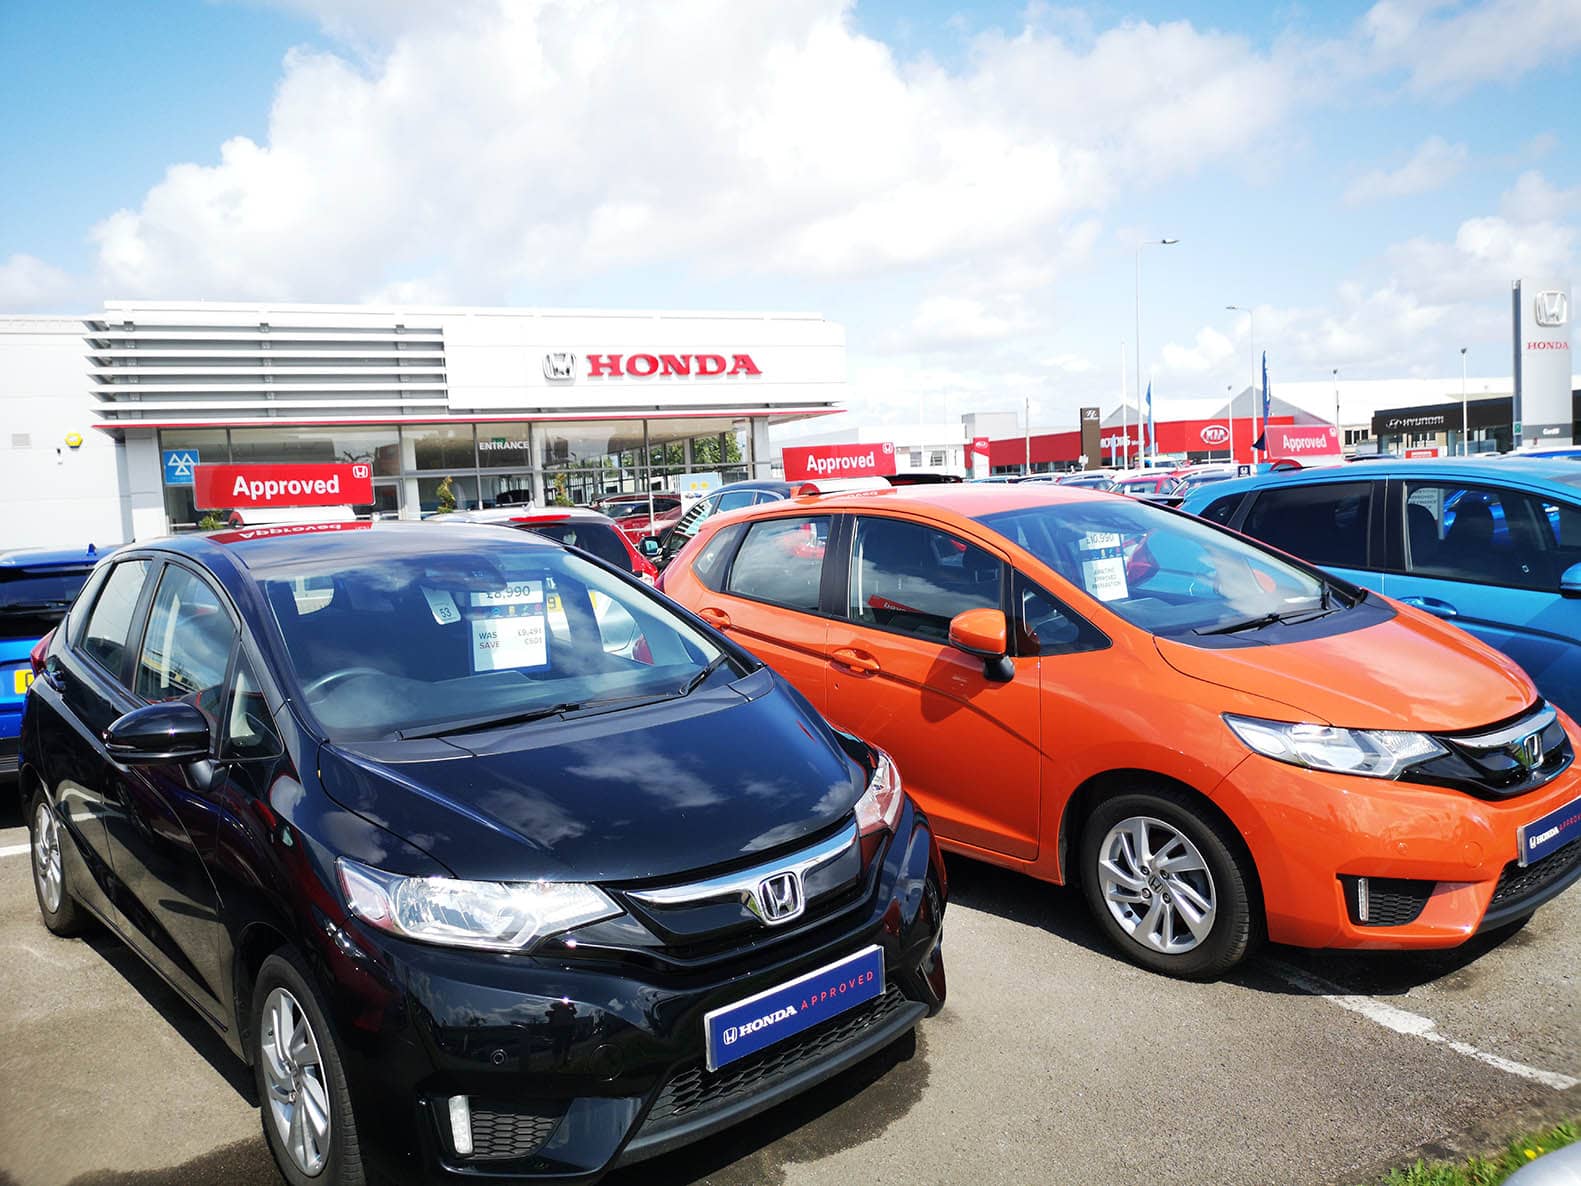 2nd hand car sales push inflation higher